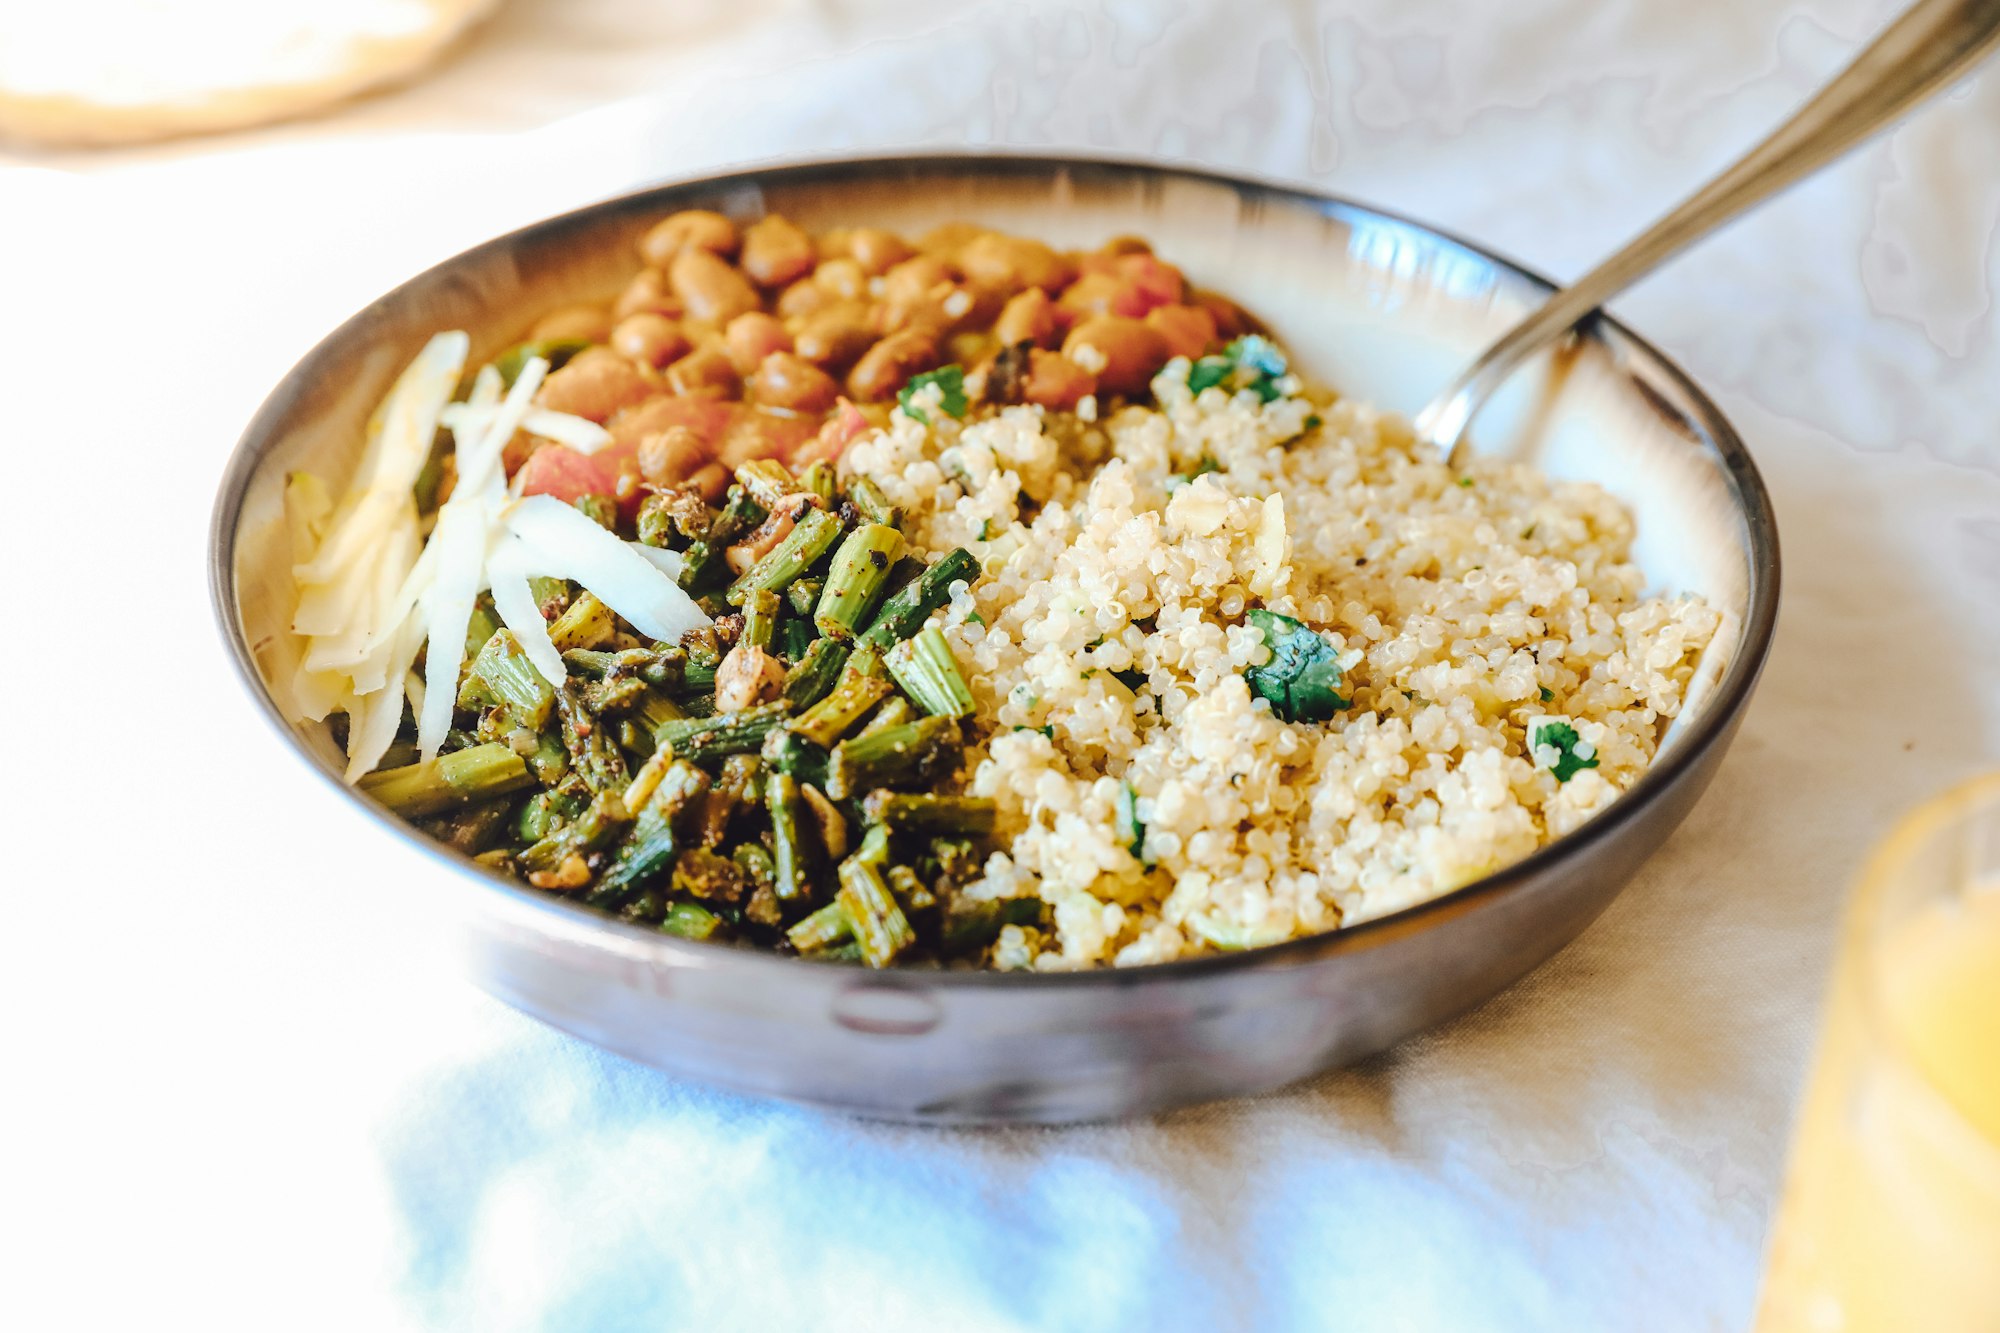 Healthy Meal Bowl with quinoa salad, pinto beans, asparagus